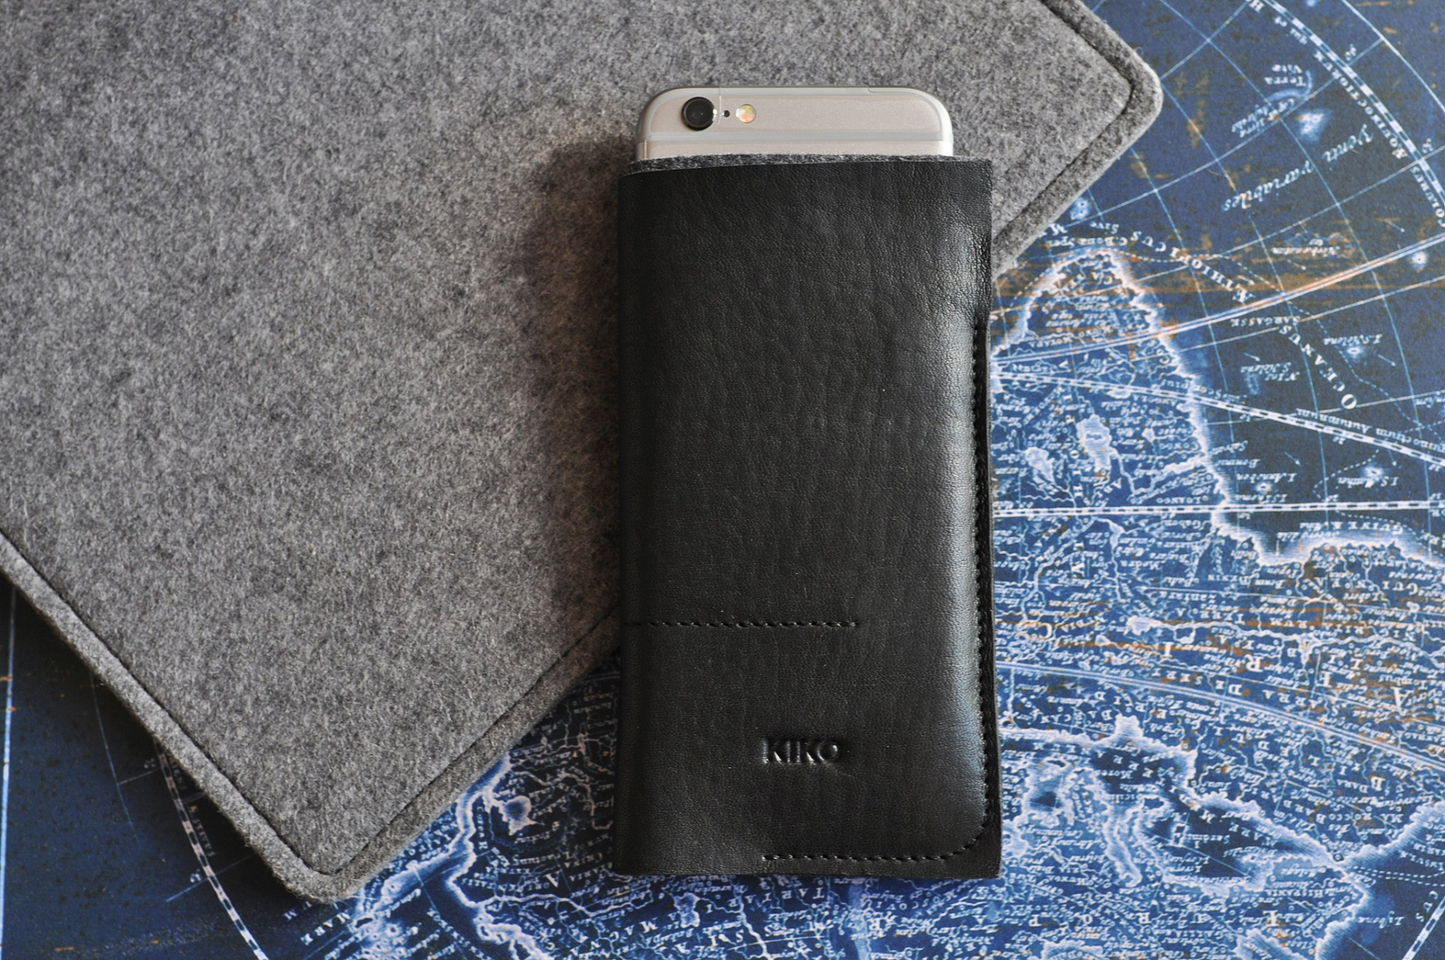 Premium American Horween Leather iPhone Wrap | Slim, Stylish, and Functional